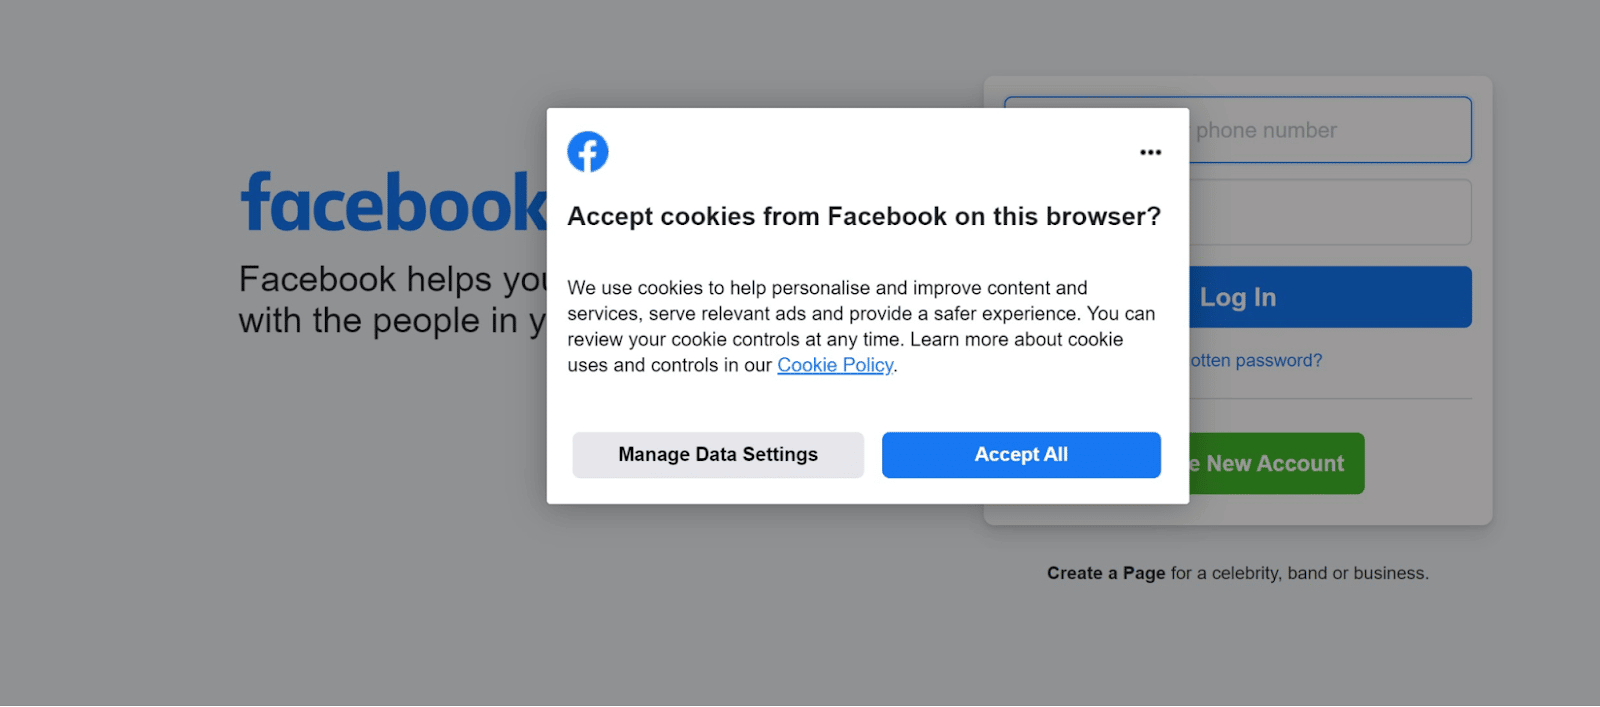 A consumer consent prompt from Facebook